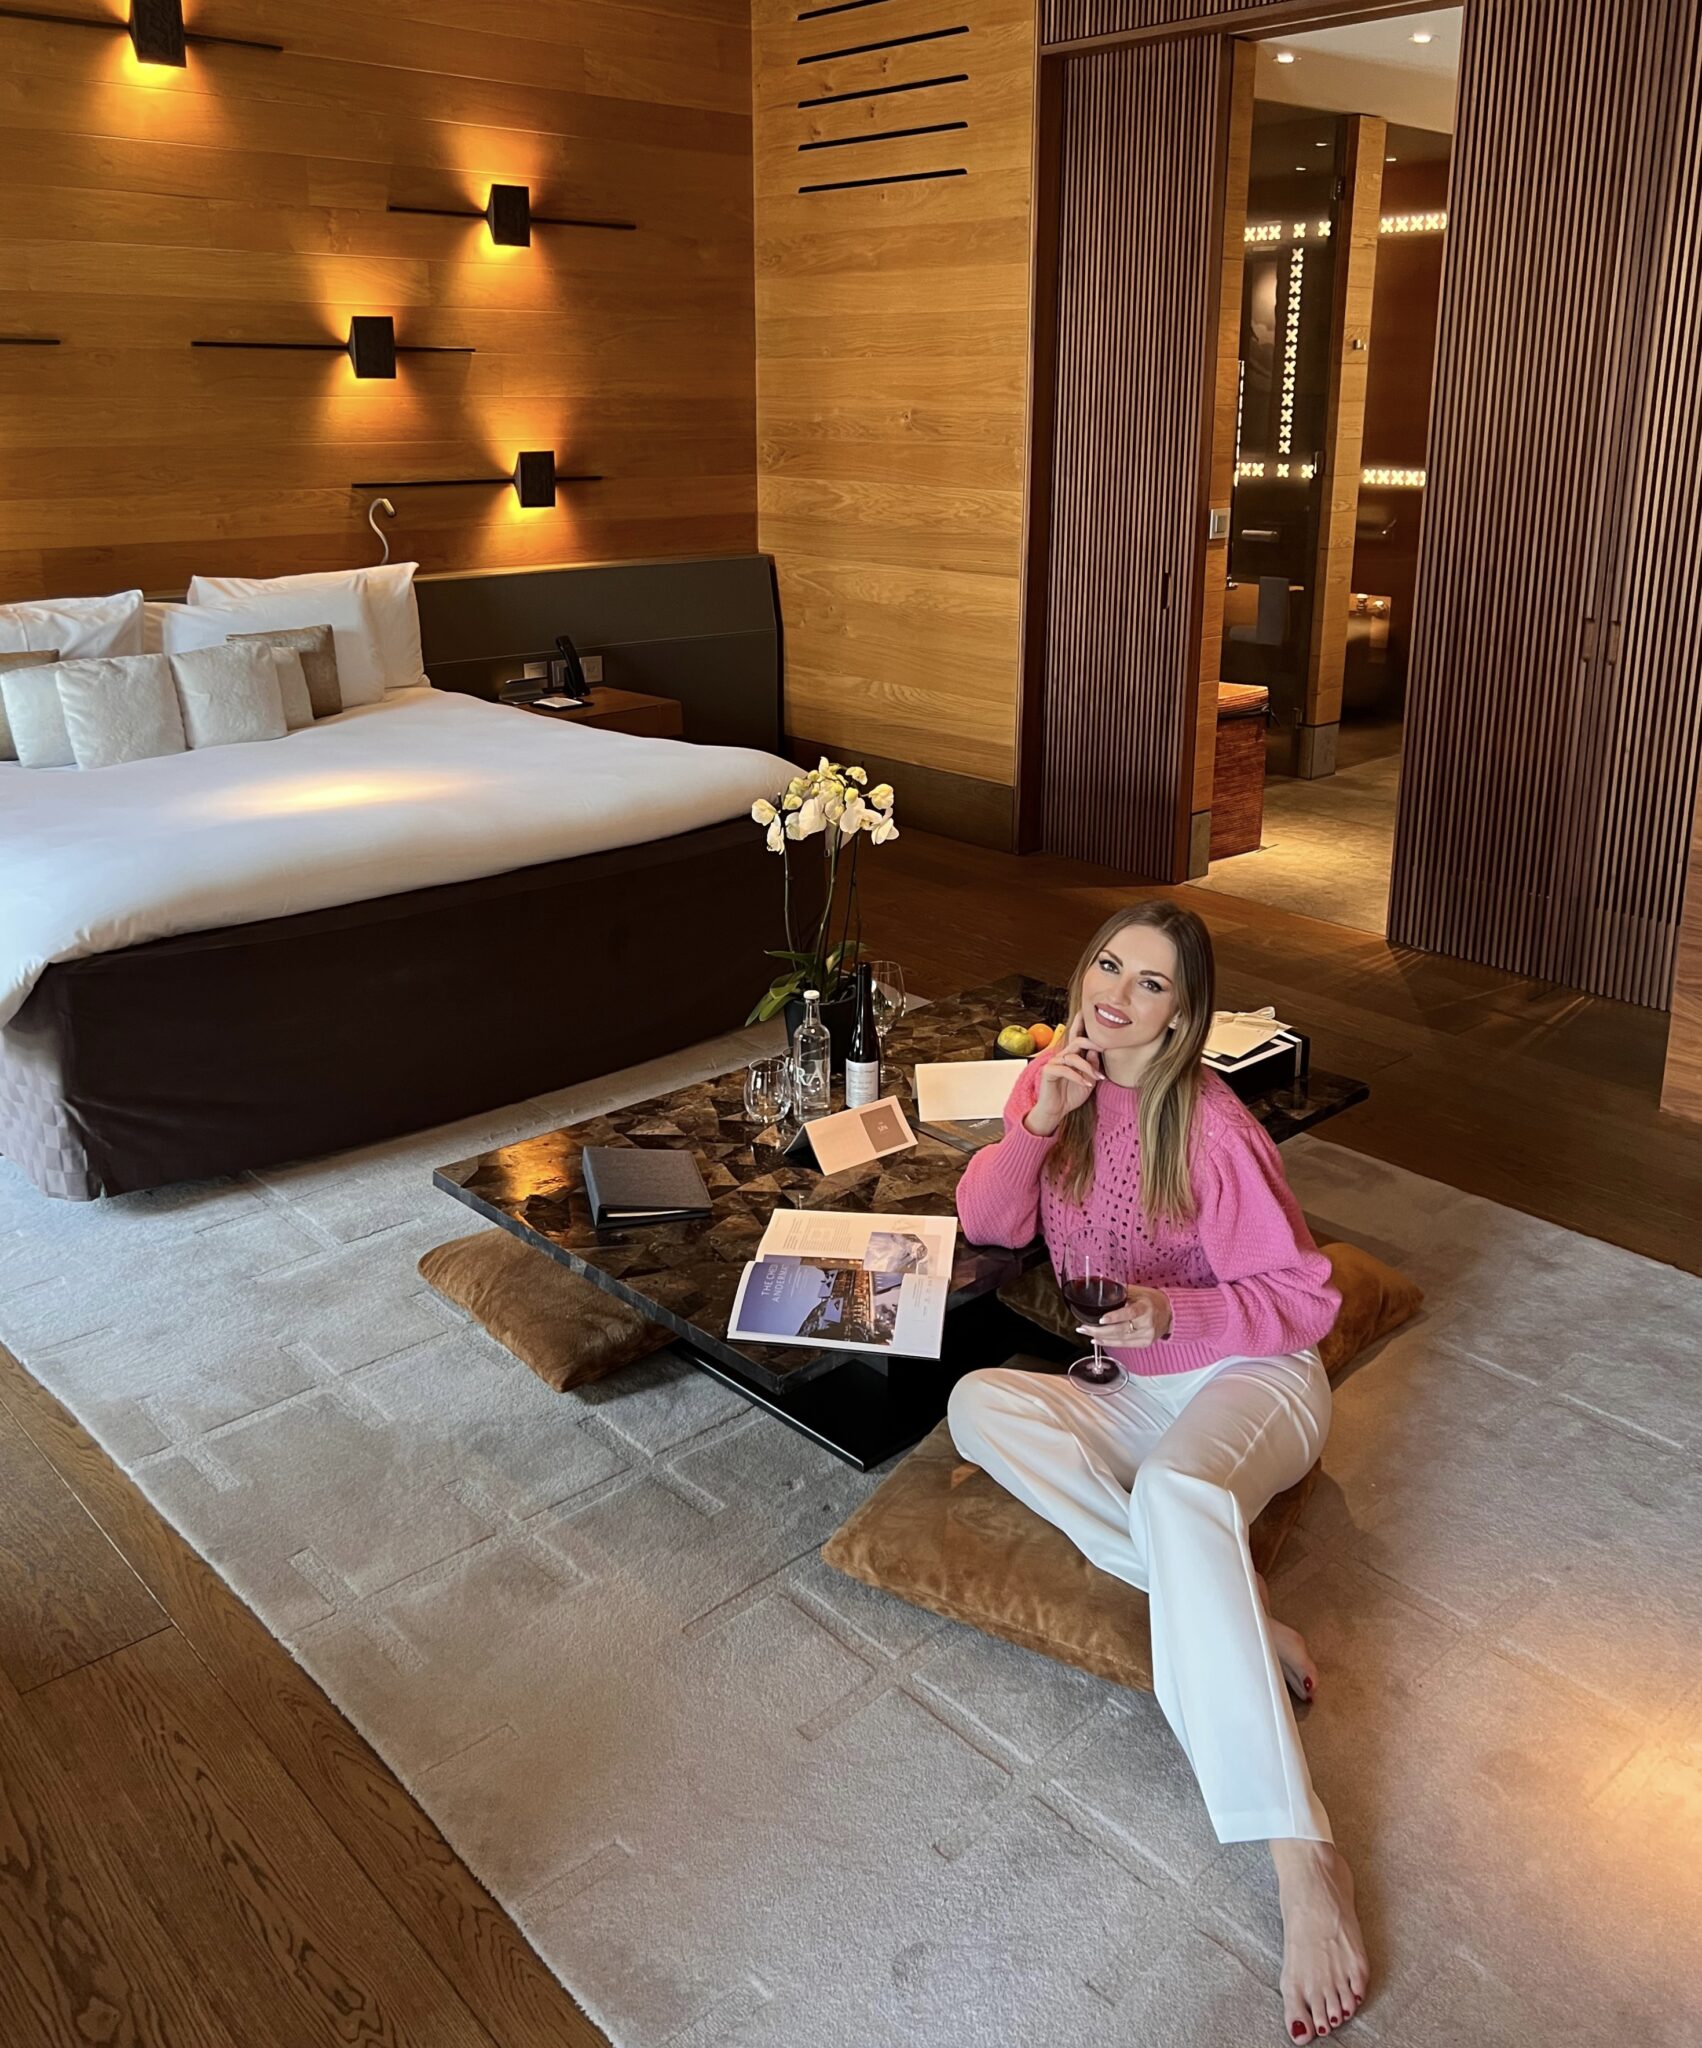 THE CHEDI ANDERMATT - Understated Luxury in the Swiss Alps. Review of The Chedi Hotel in Andermatt, number 1 in Switzerland.